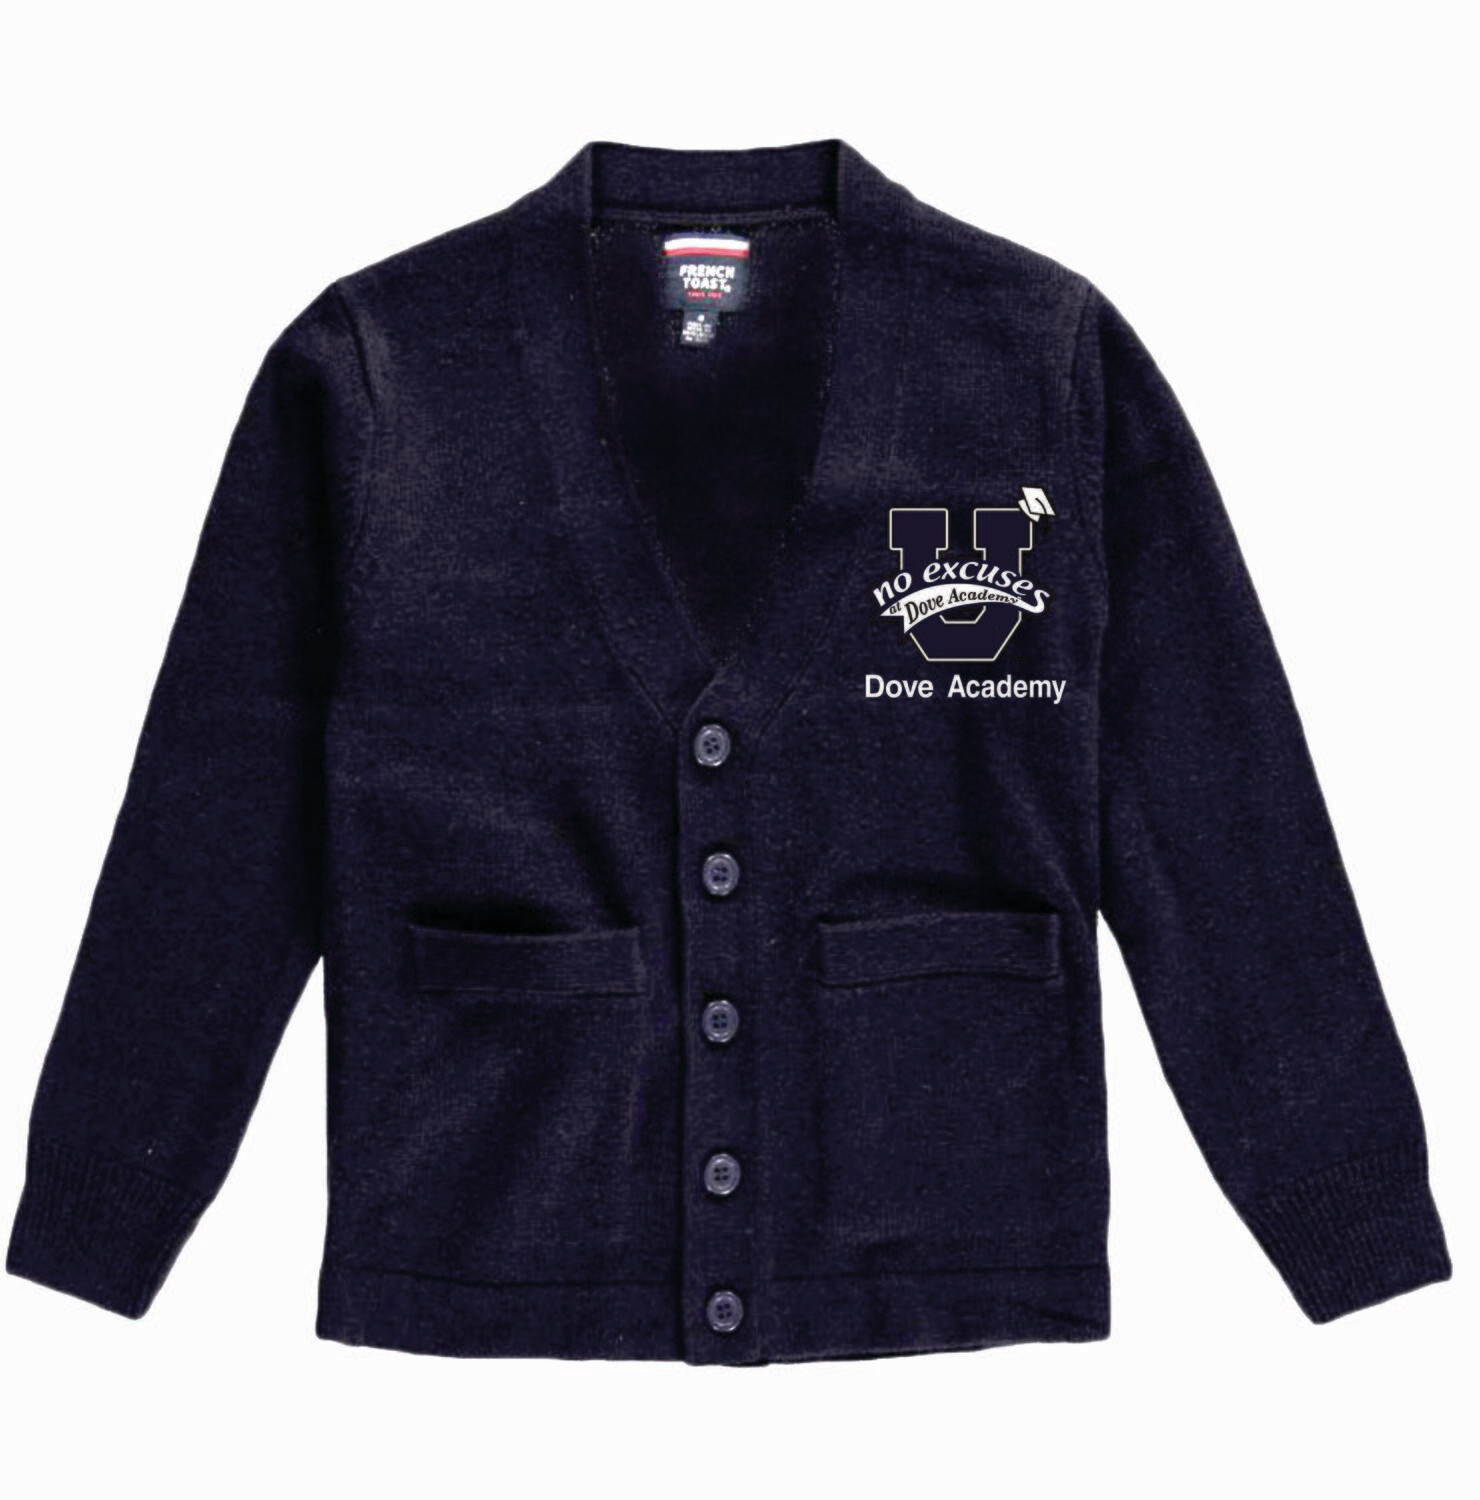 Dove Cardigan Sweater With Embroidered Dove Academy Logo